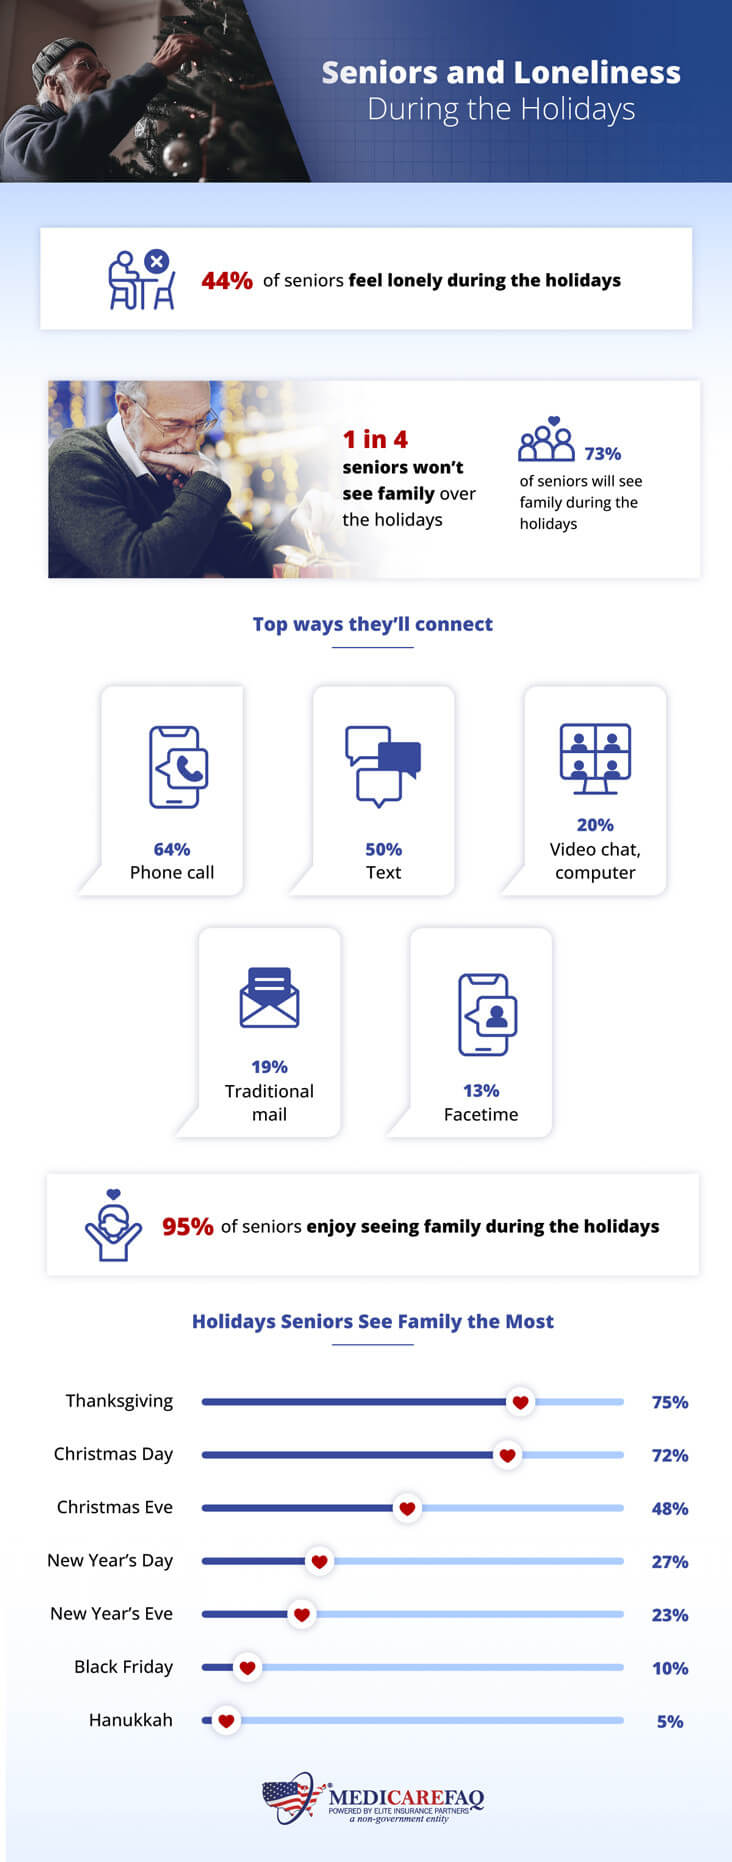 Top holidays seniors see their families and holiday loneliness survey statistics - study from MedicareFAQ.com